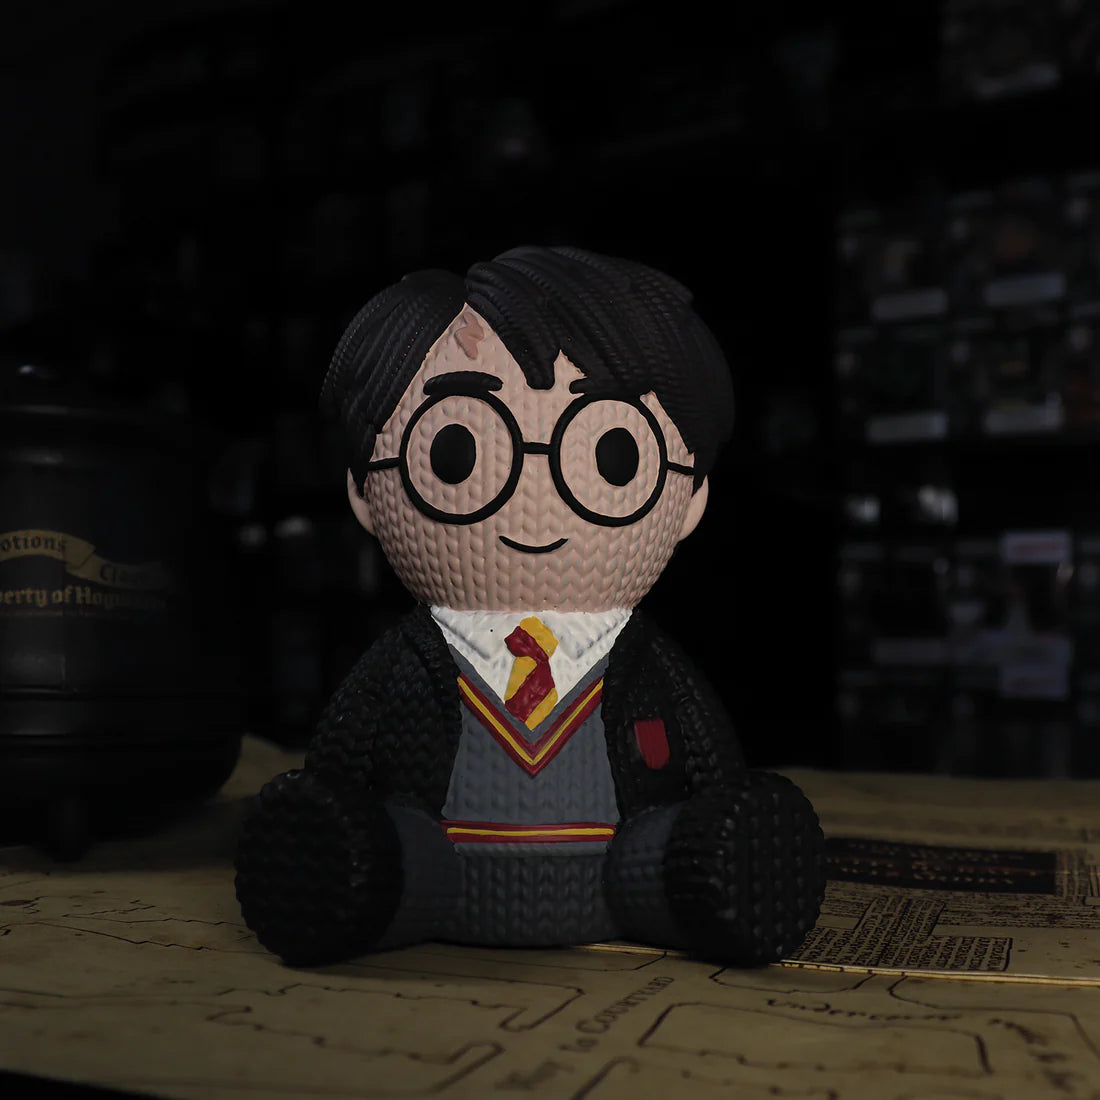 Harry Potter - Handmade By Robots N°062